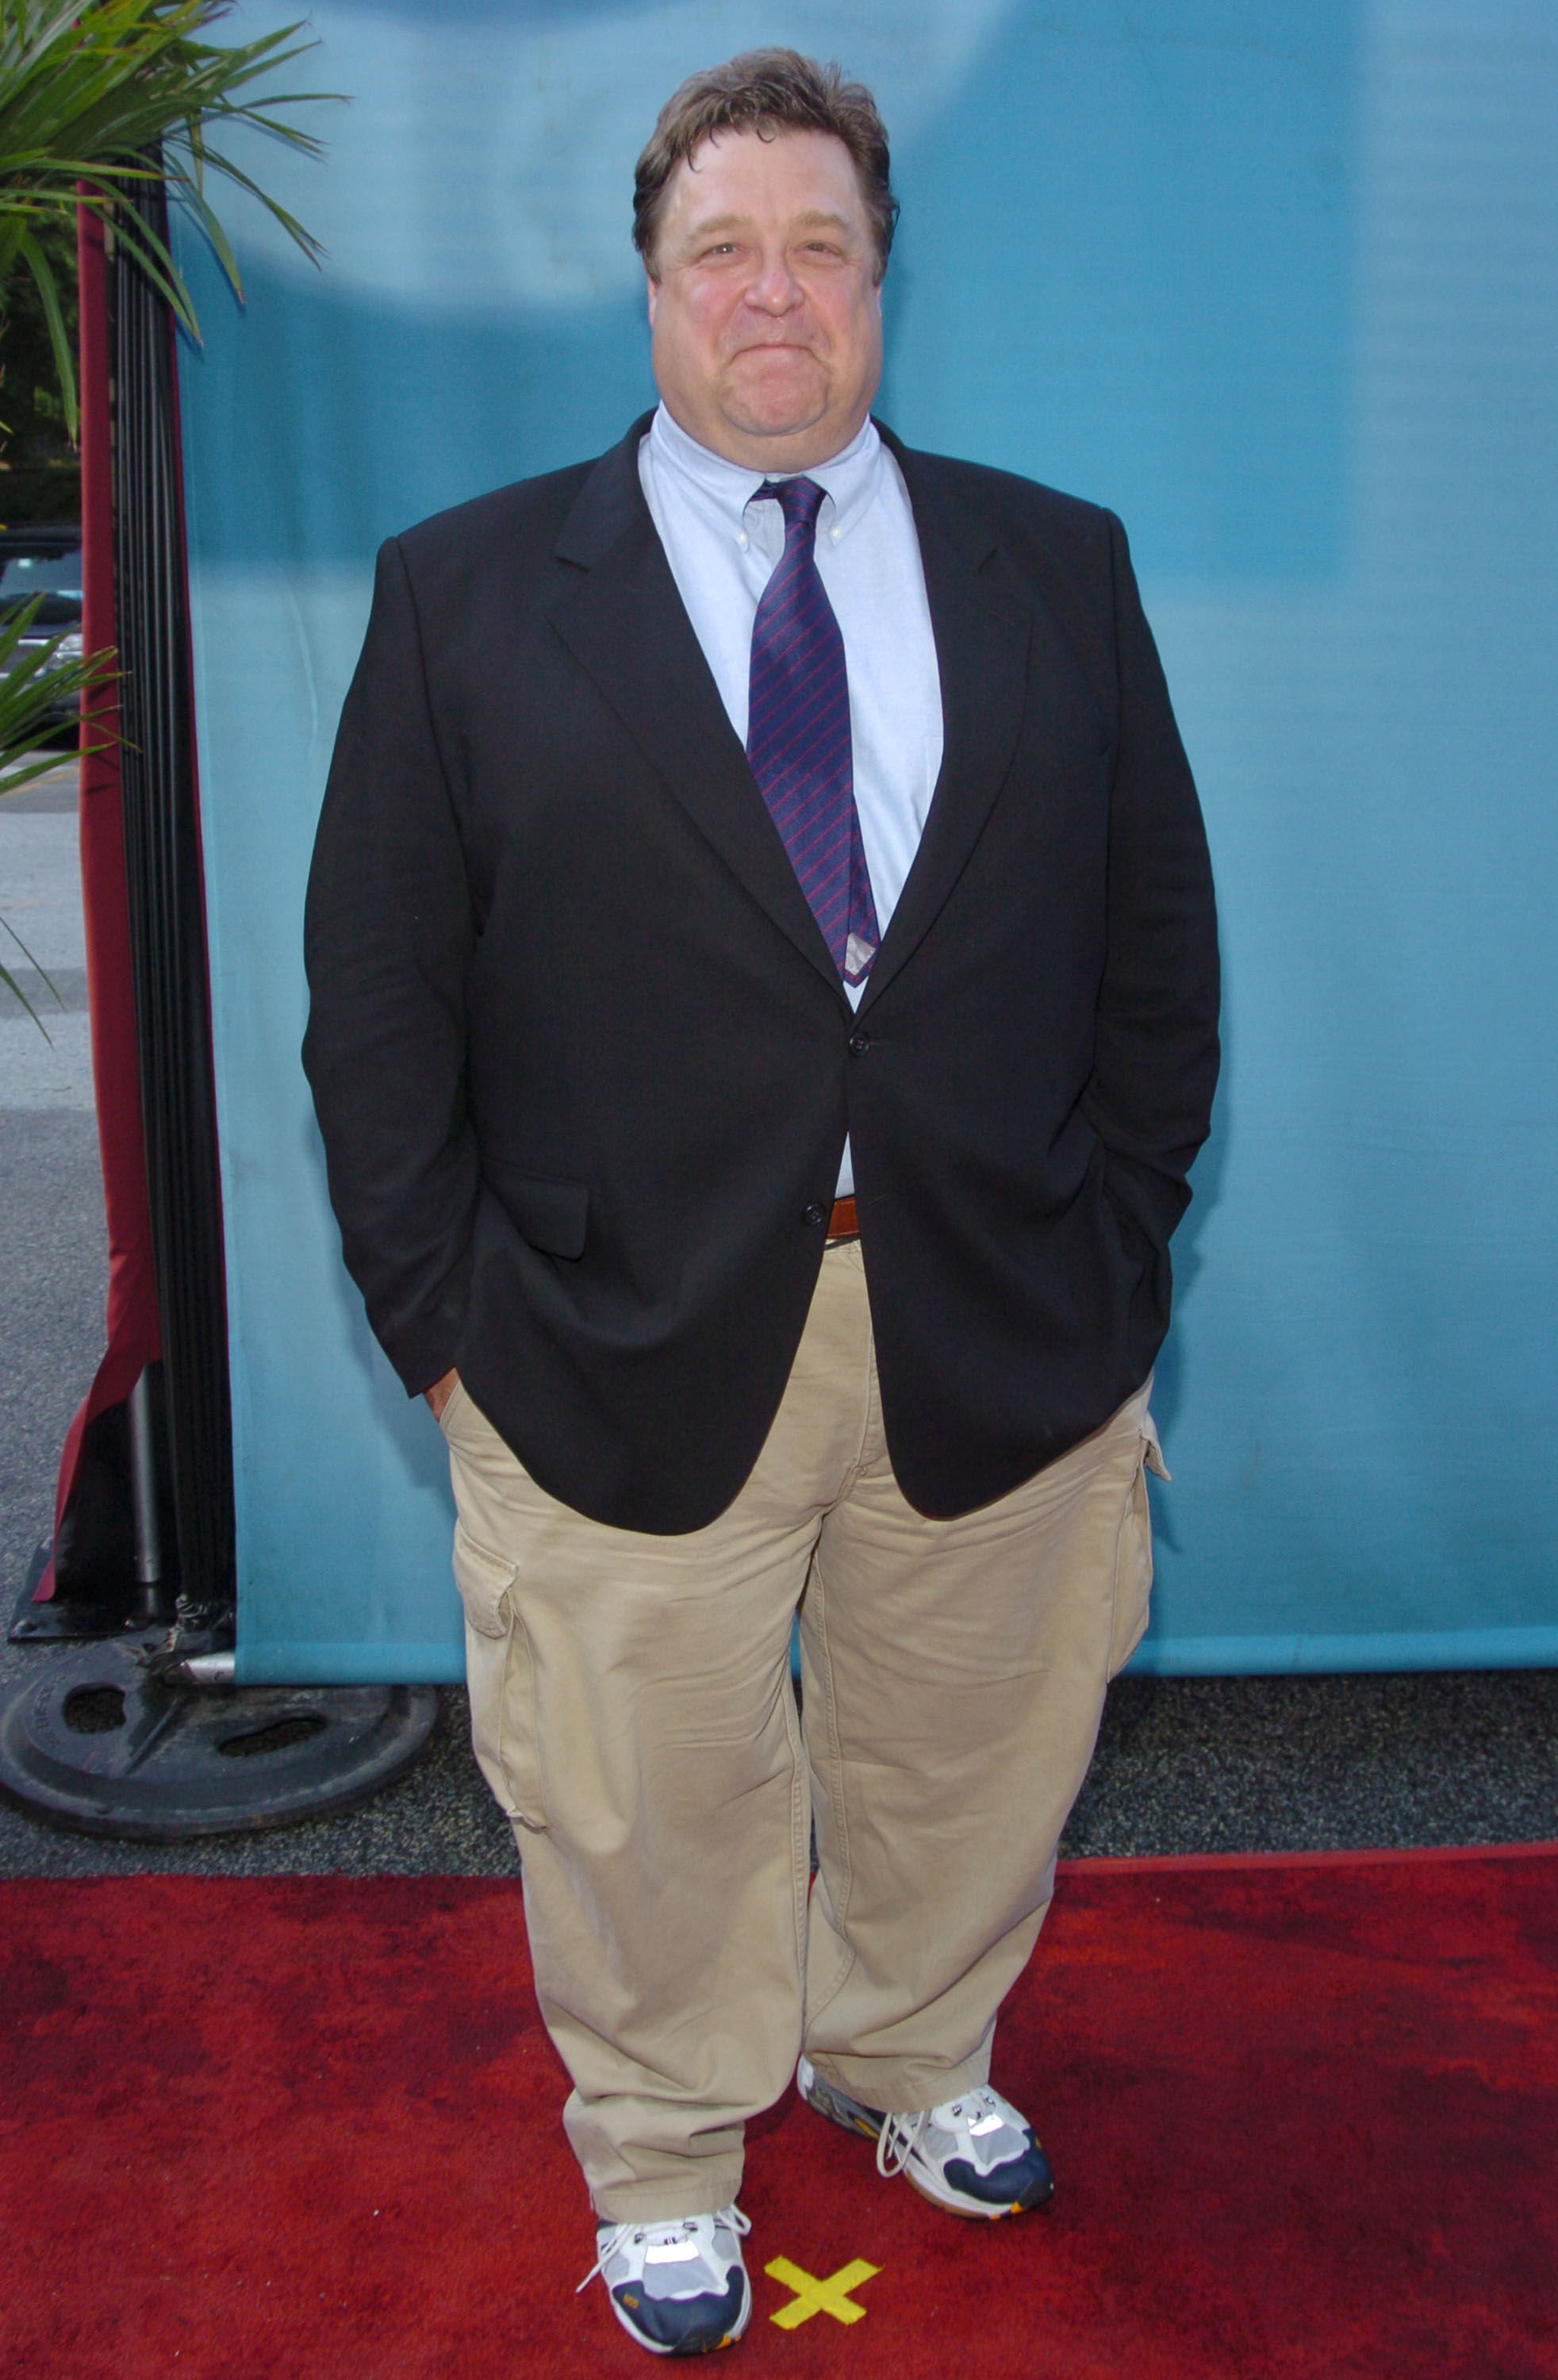 John Goodman attends the CBS Primetime 2004-2005 UpFront Party | Source: Getty Images